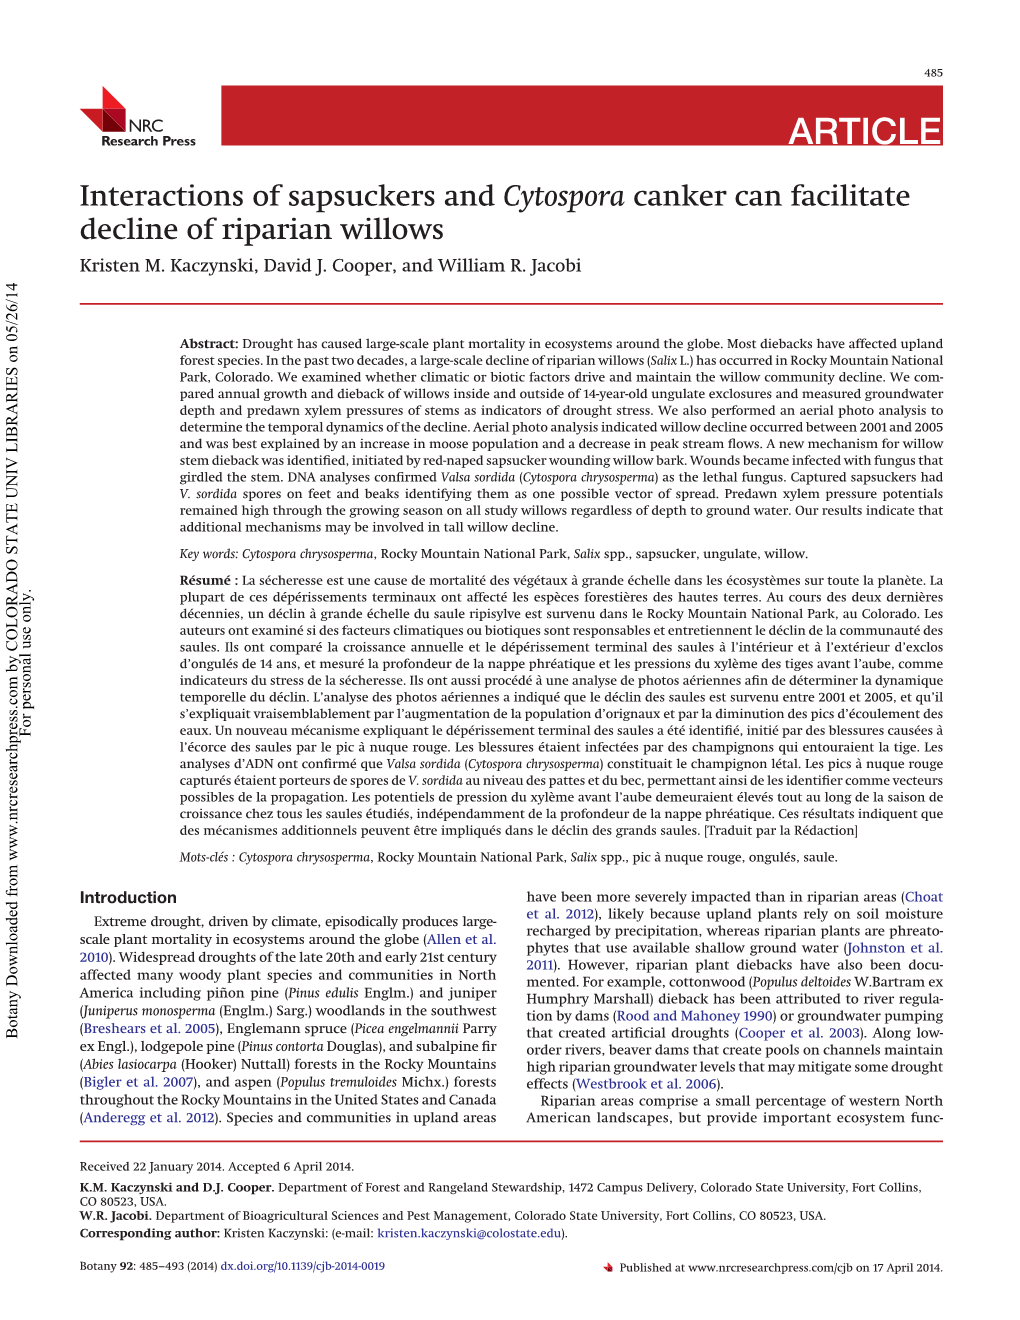 Interactions of Sapsuckers and Cytospora Canker Can Facilitate Decline of Riparian Willows Kristen M